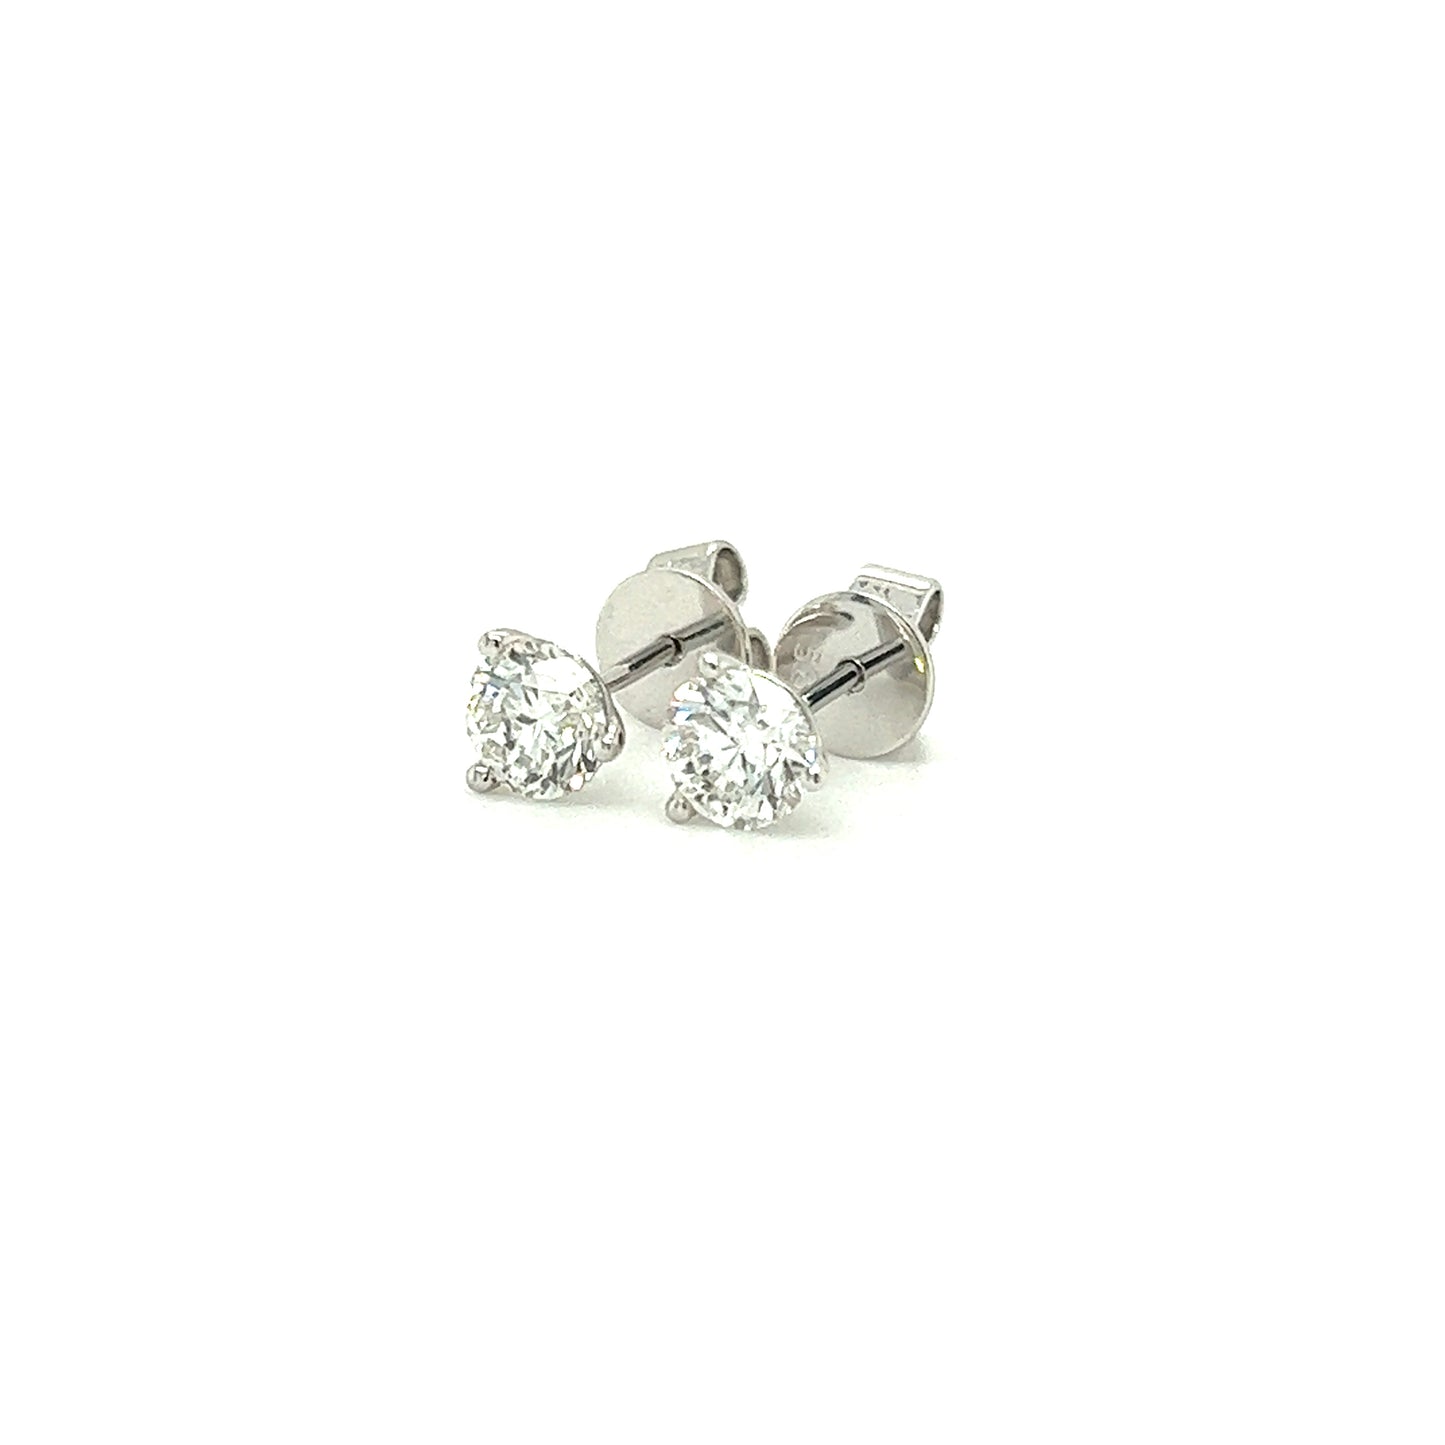 Diamond Stud Earrings with 0.75ctw of Diamonds in 14K White Gold Right Side View